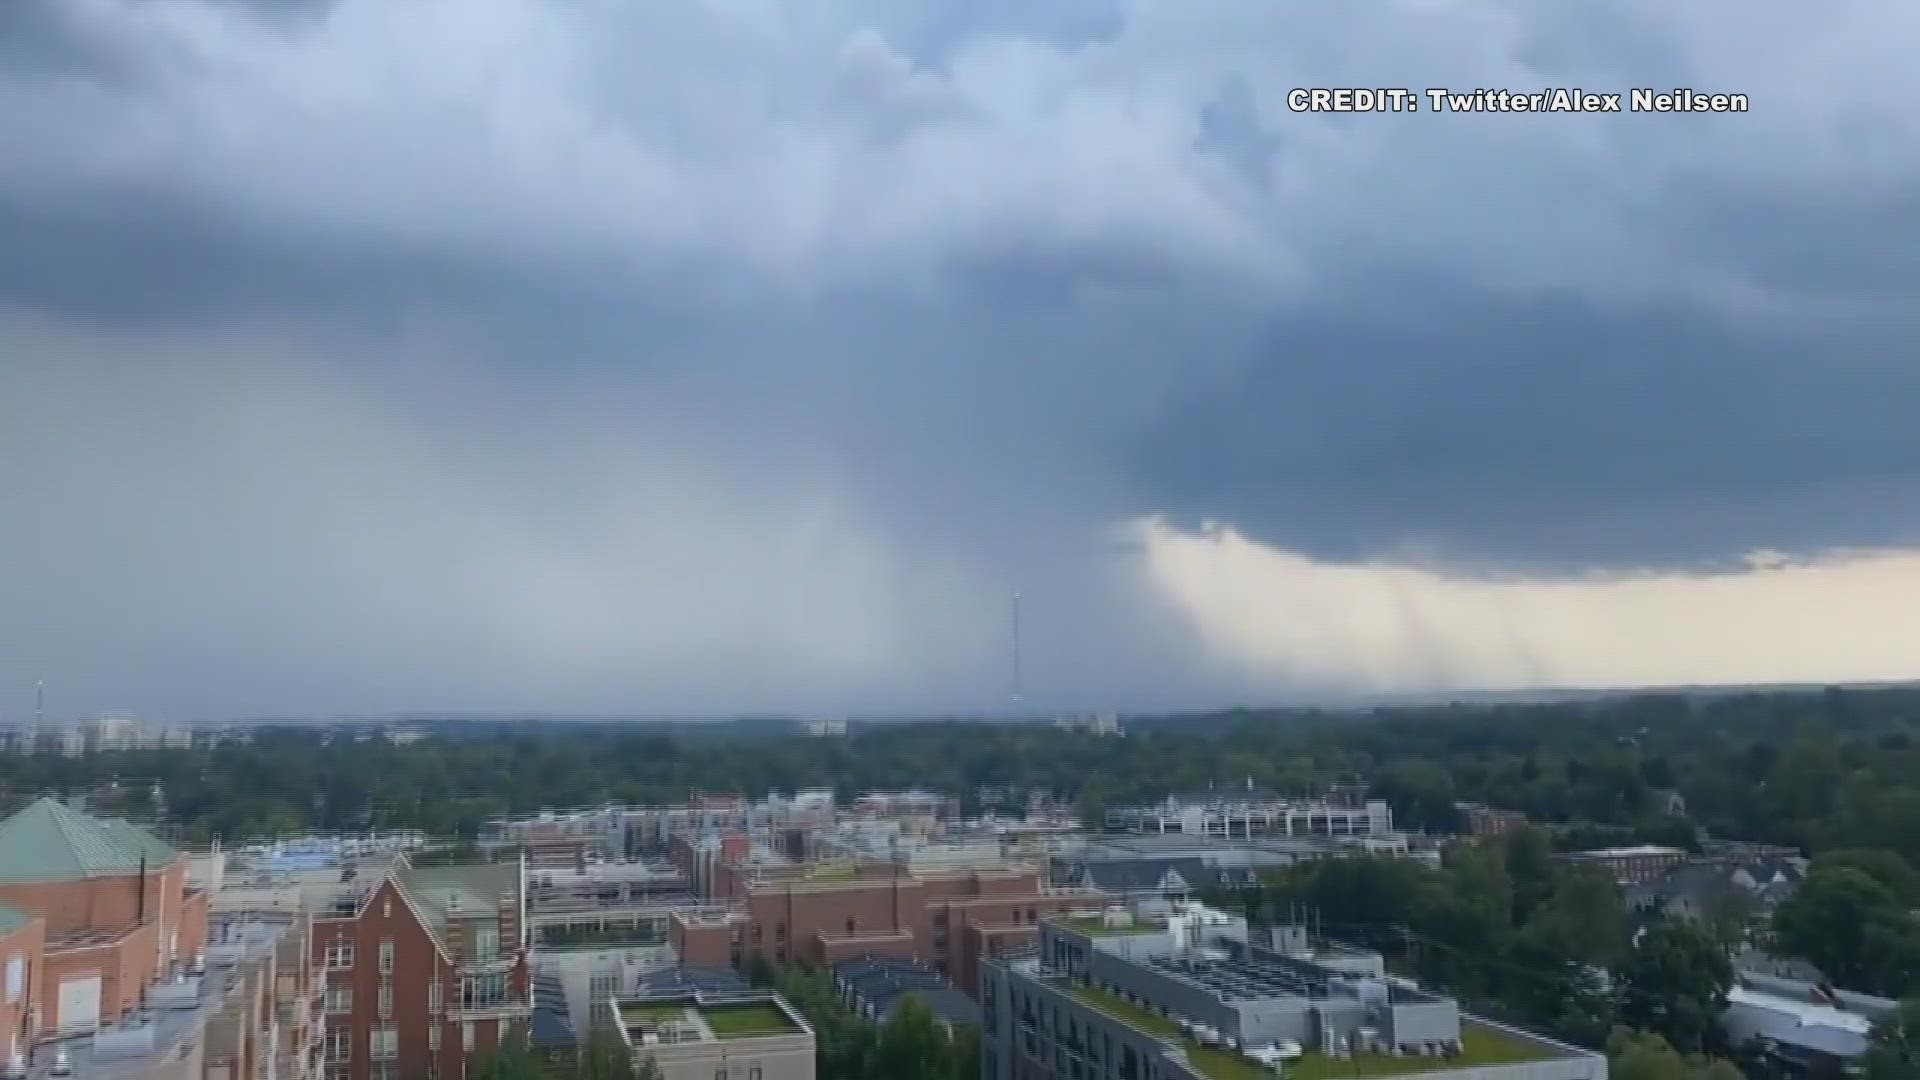 Take a look at this video showing storms heading towards downtown Bethesda, Maryland.